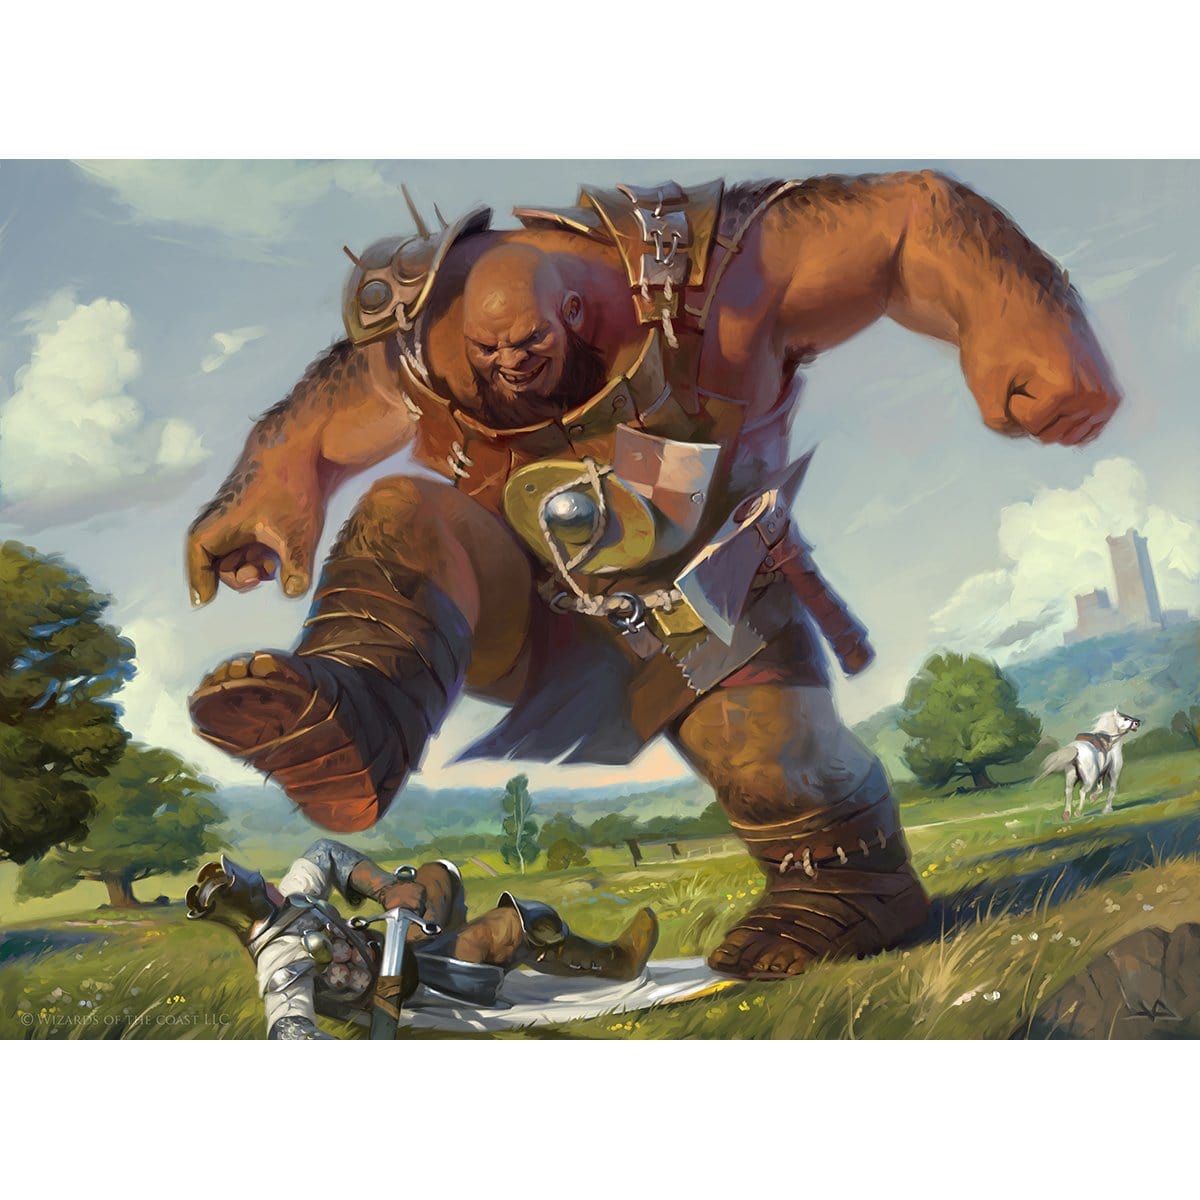 Bonecrusher Giant Print - Print - Original Magic Art - Accessories for Magic the Gathering and other card games